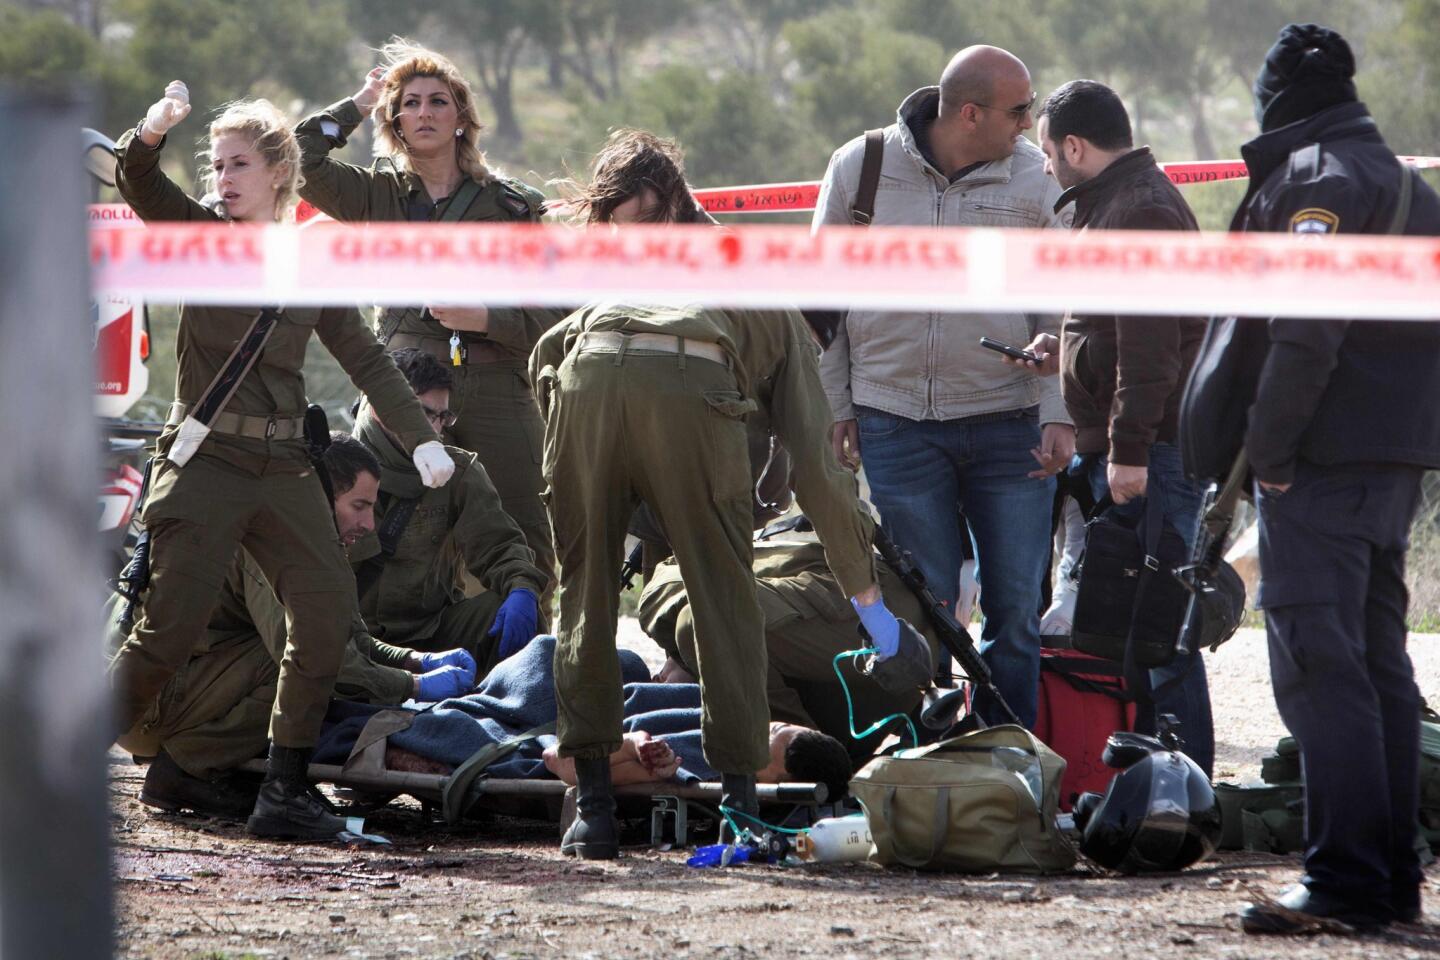 An injured Palestinian suspected attacker is treated by Israeli medic soldiers after he was shot following a stabbing attack on Jan. 18, 2016 in the Tekoa settlement south of Jerusalem.